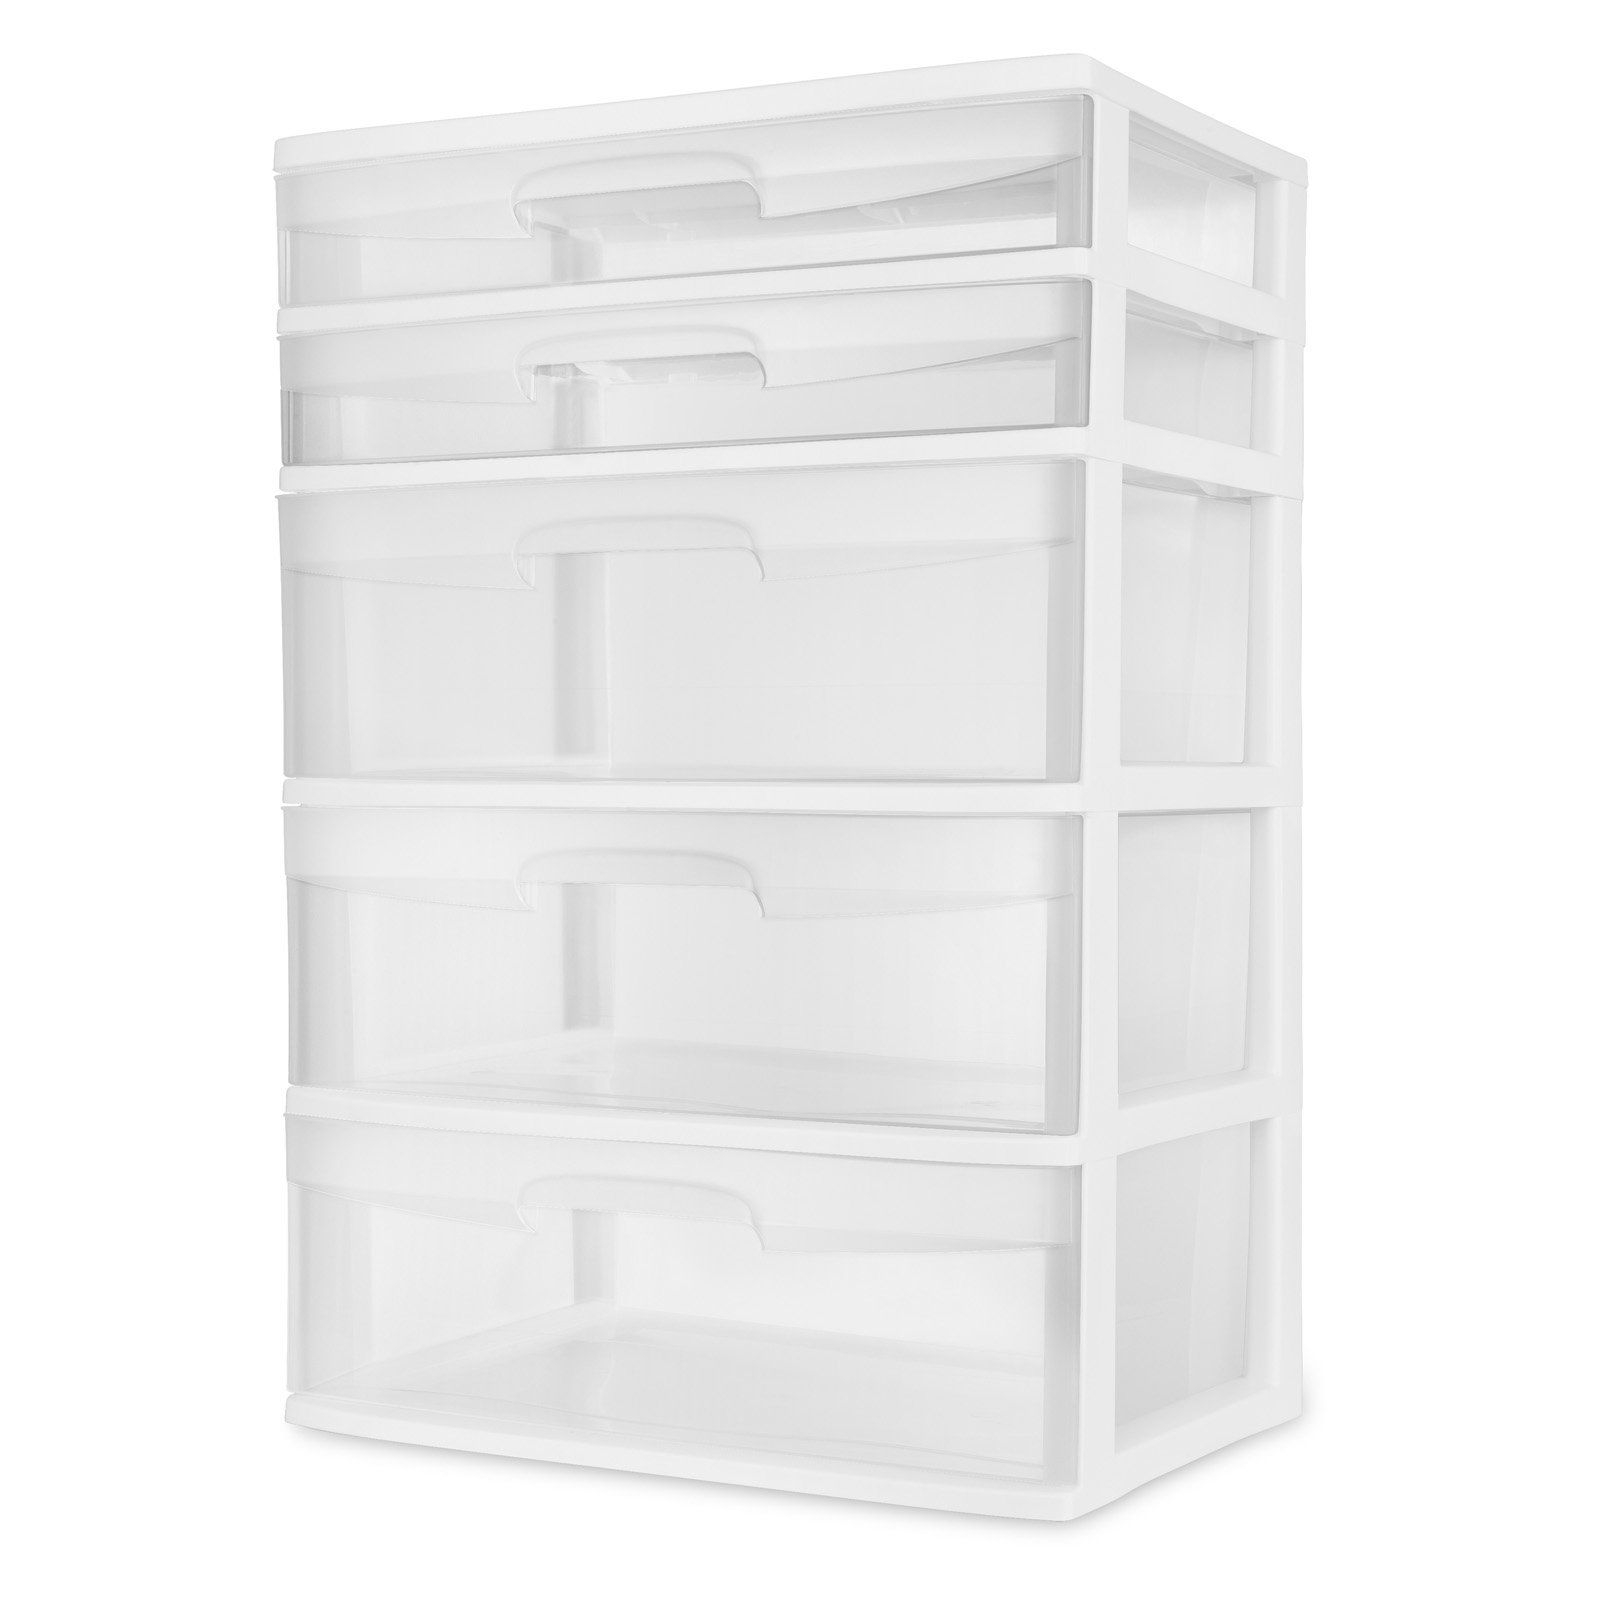 Sterilite 5 Drawer Wide Tower White For The Home In 2019 throughout size 1600 X 1600